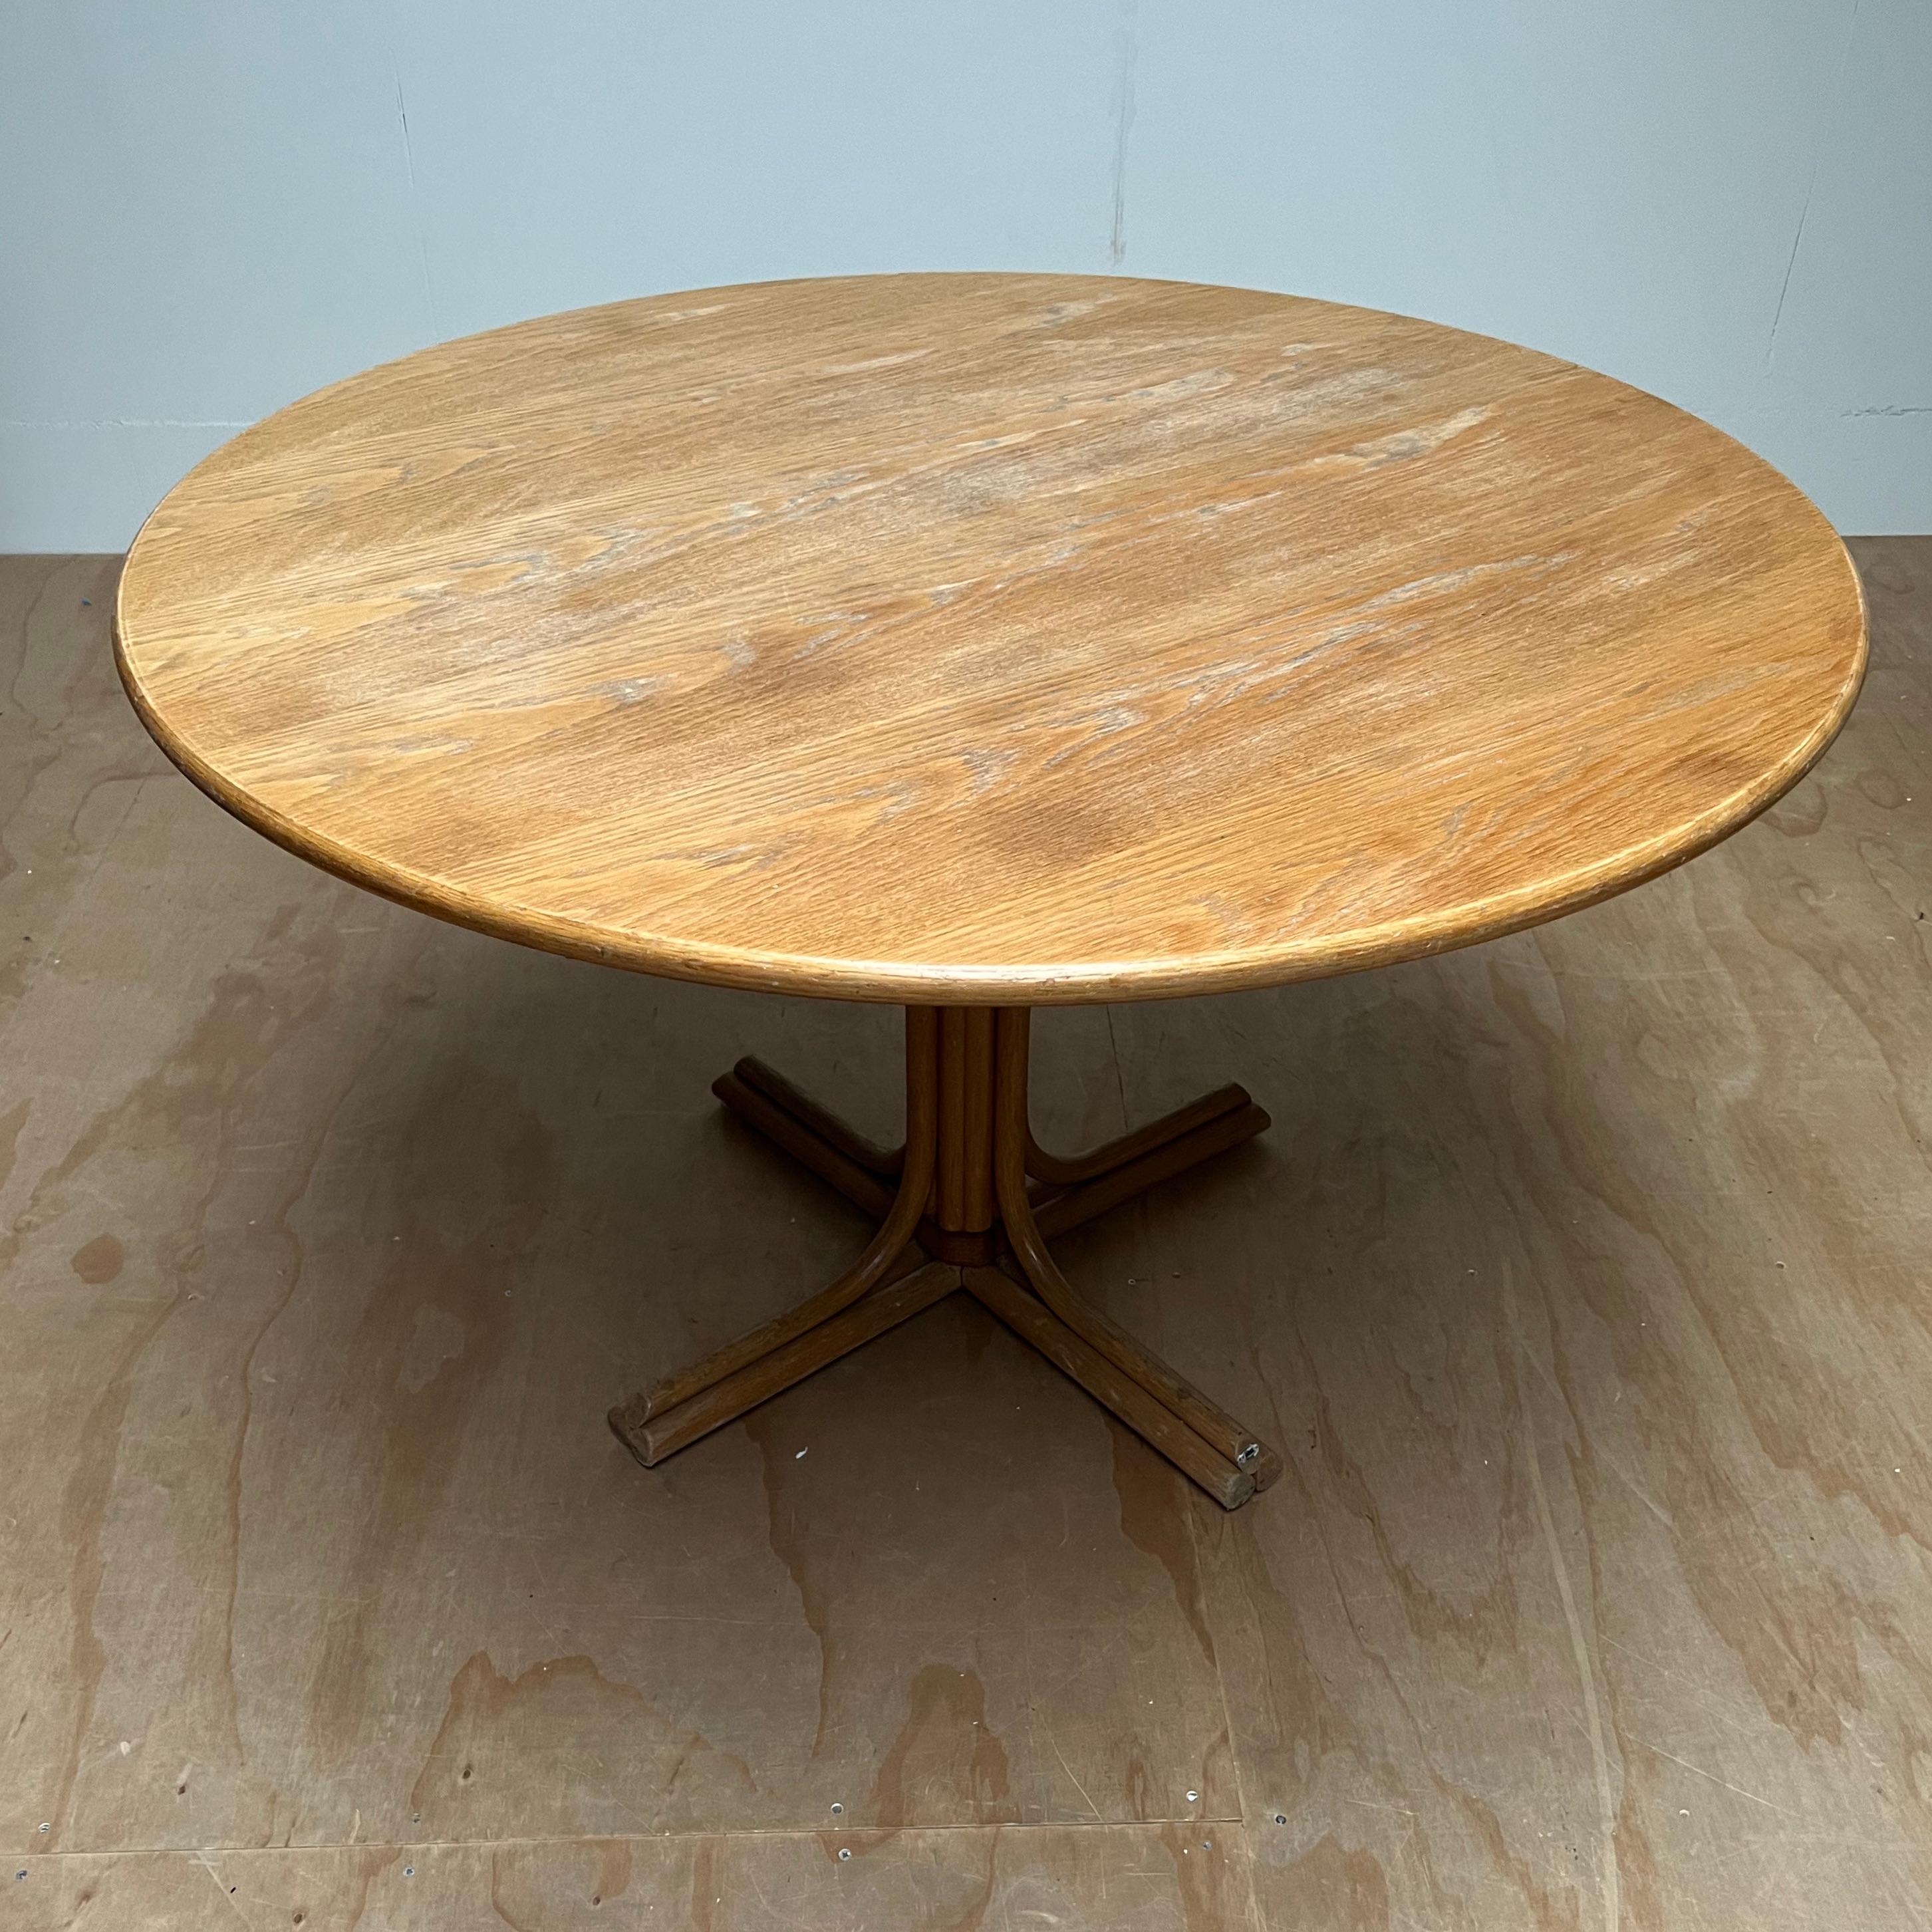 Rare Handcrafted & Stylish Mid-Century Modern Rattan, Leather & Oak Round Table For Sale 4